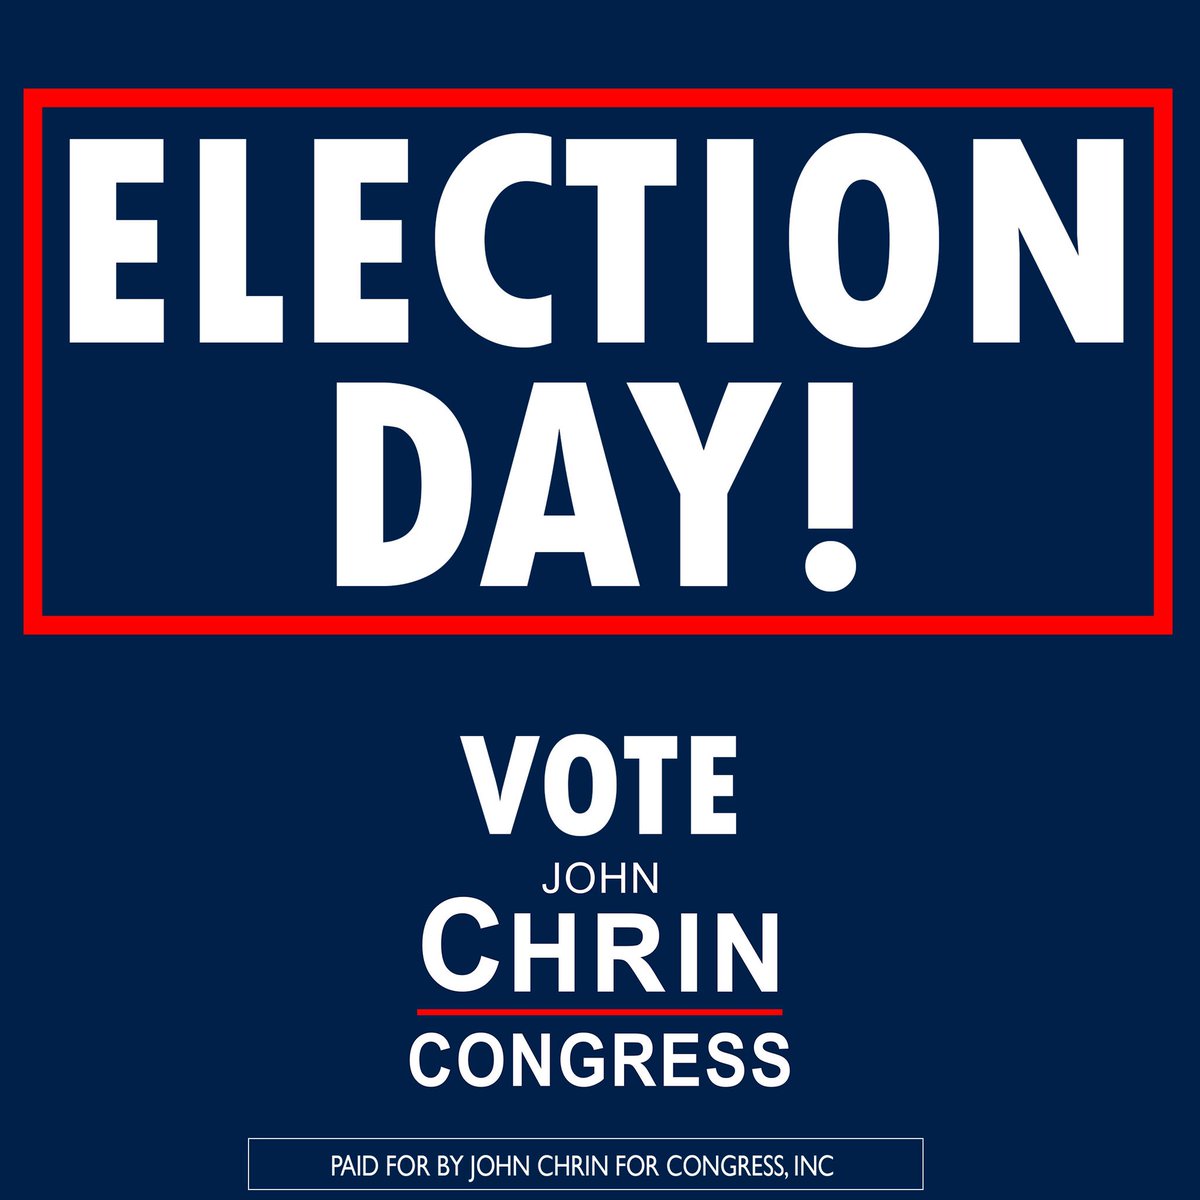 It’s 3pm on Election Day! Vote John Chrin For Congress for more jobs, economic prosperity for Northeastern PA, no caravans, and no sanctuary cities! #PA8 #JohnChrinForCongress